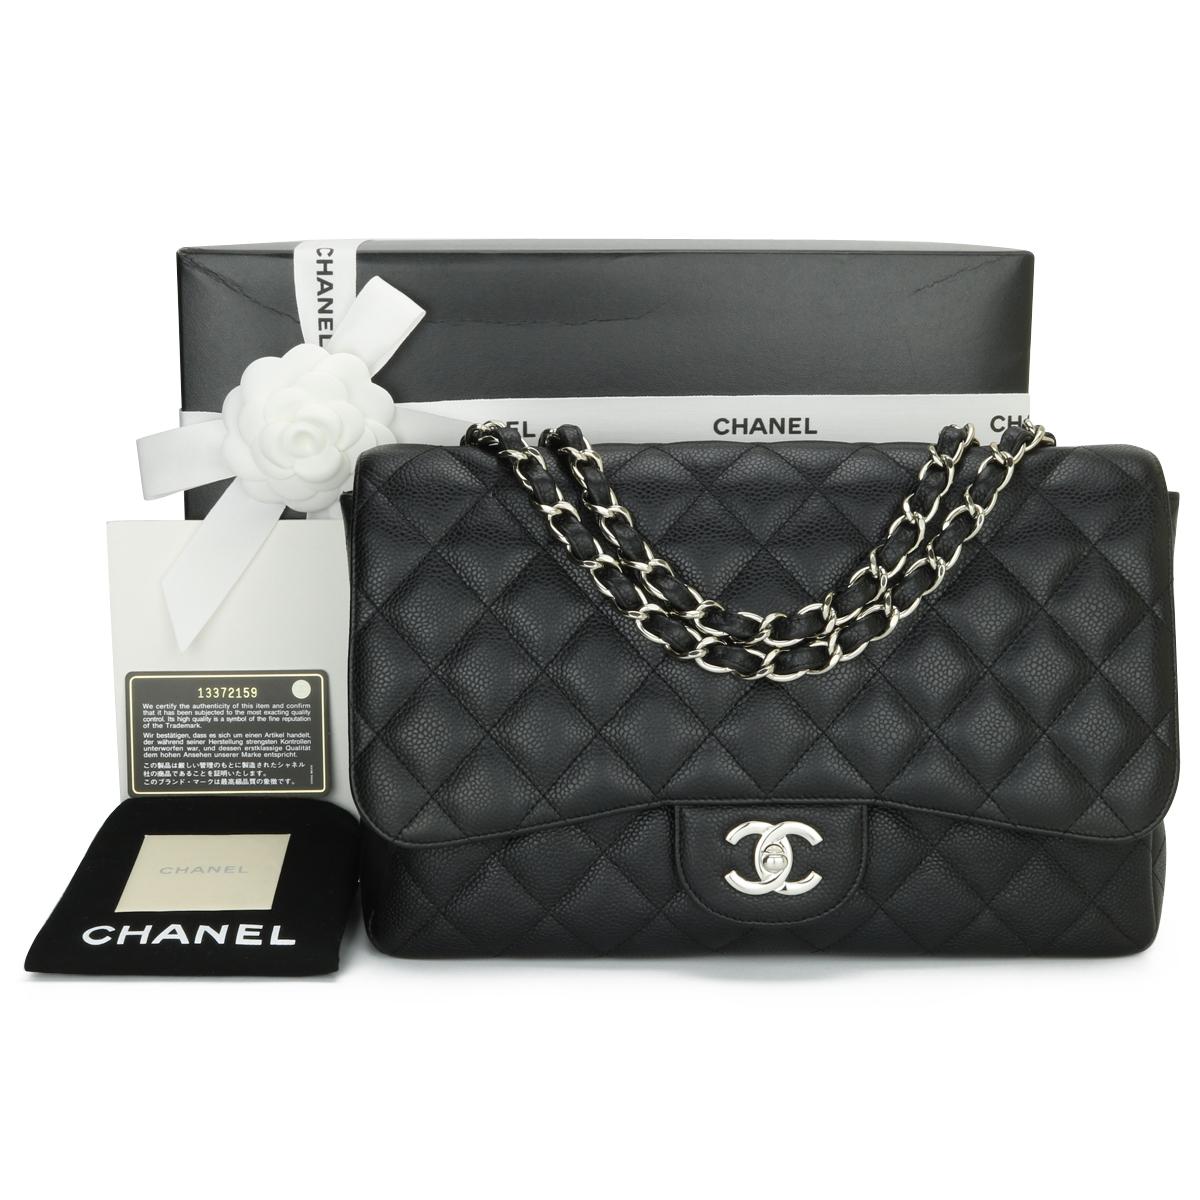 CHANEL Classic Single Flap Jumbo Bag Black Caviar with Silver Hardware 2009.

This stunning bag is in excellent condition, the bag still holds its shape quite well, and the hardware is still very shiny. 

- Exterior Condition: Excellent condition.